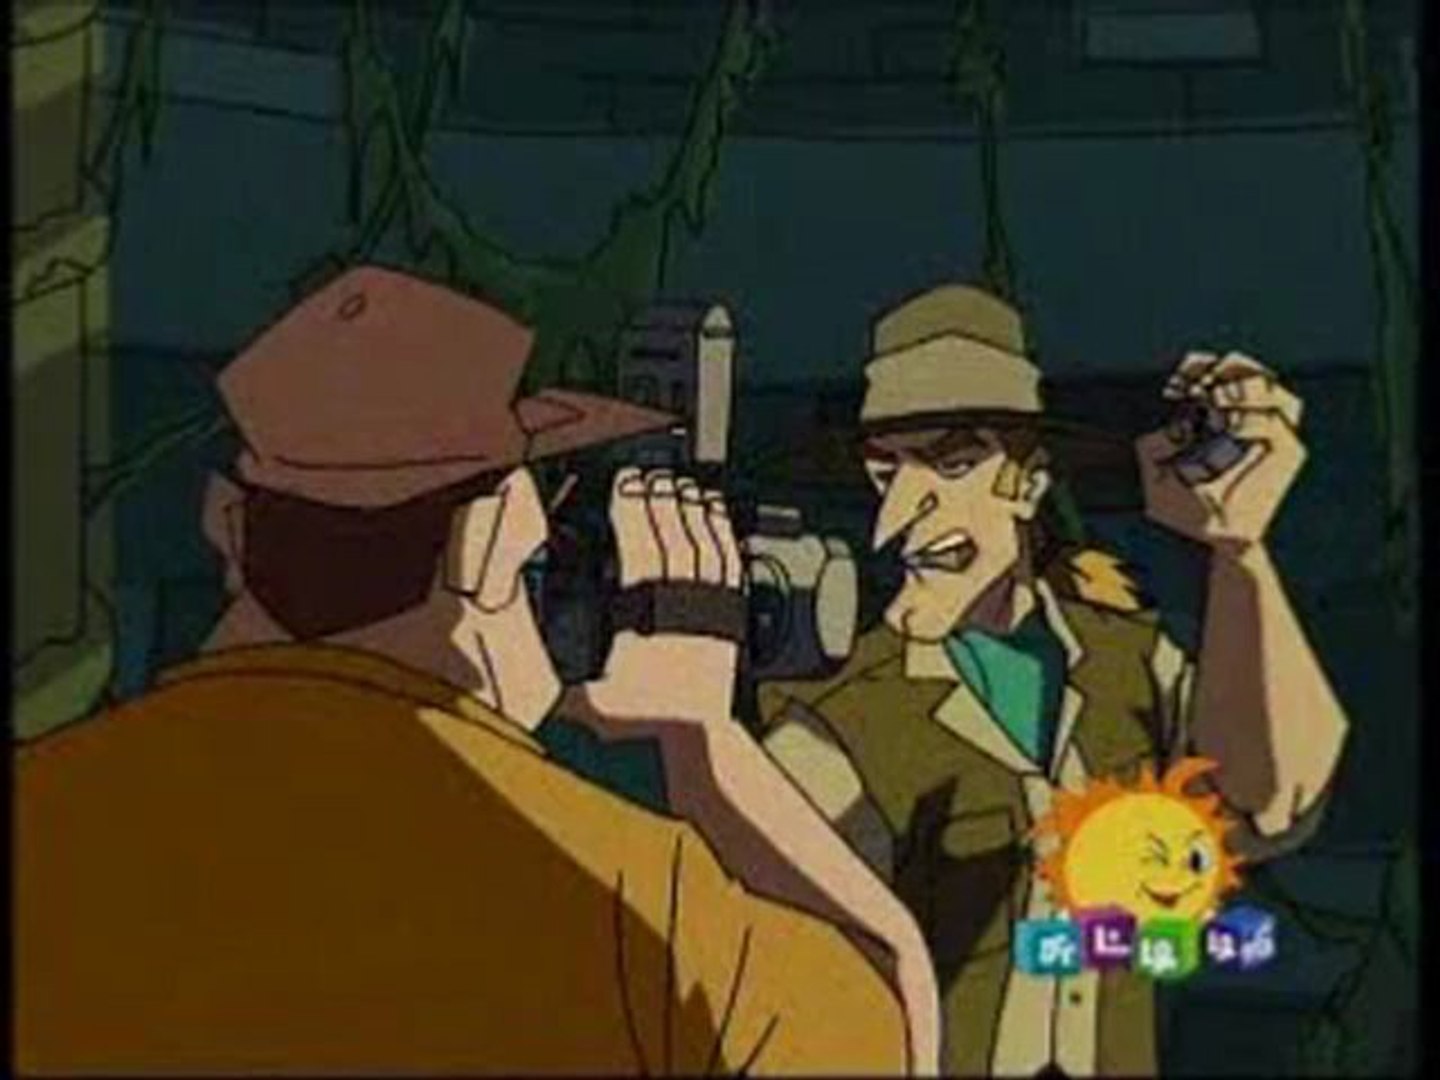 JACKIE CHAN ADVENTURES [searching snake magic stone] - video Dailymotion